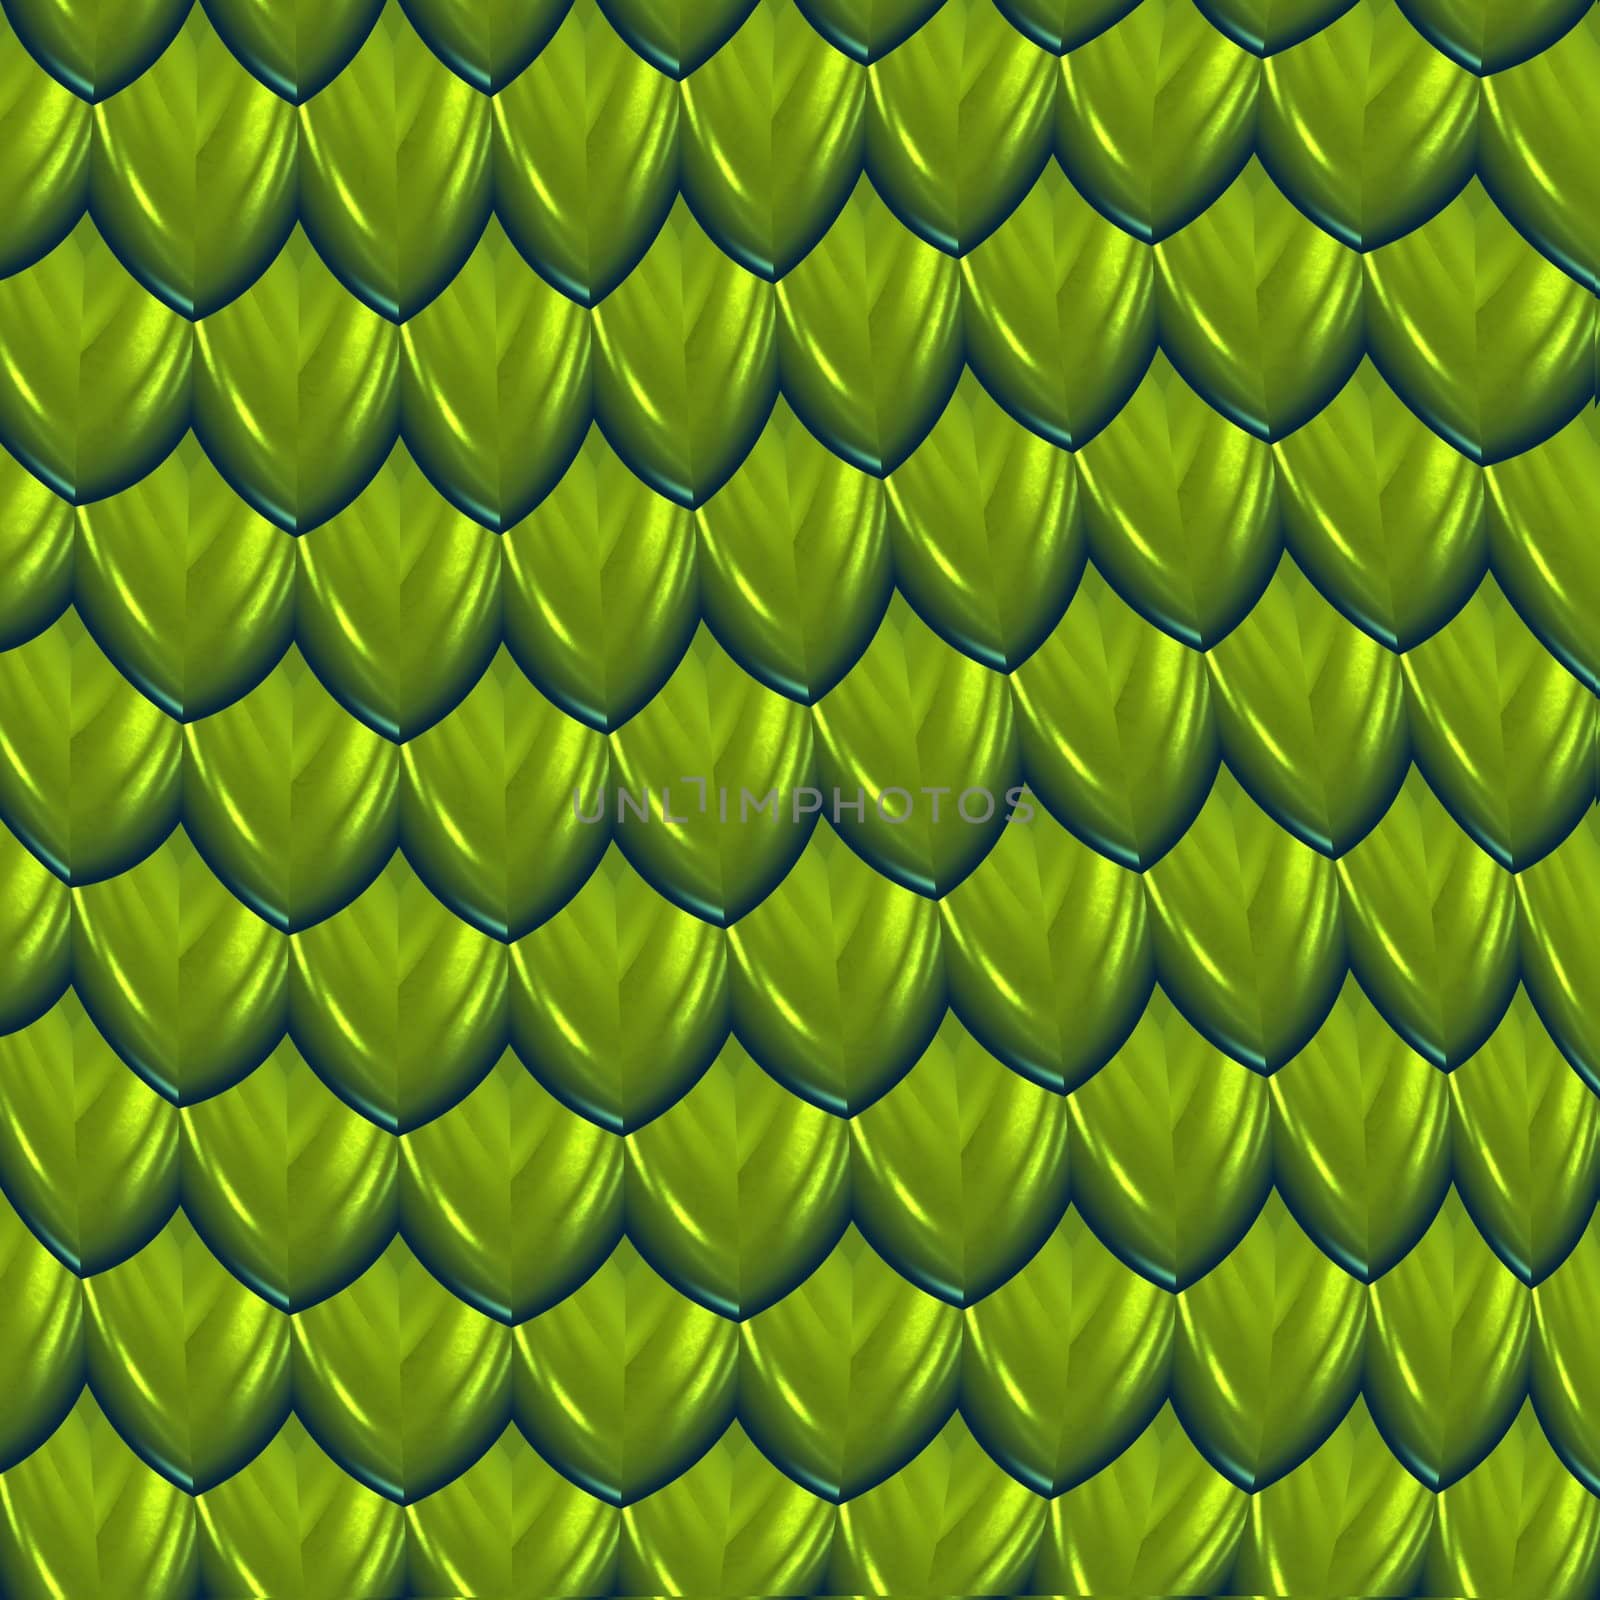 a large image of green shiny dragon scales or hide